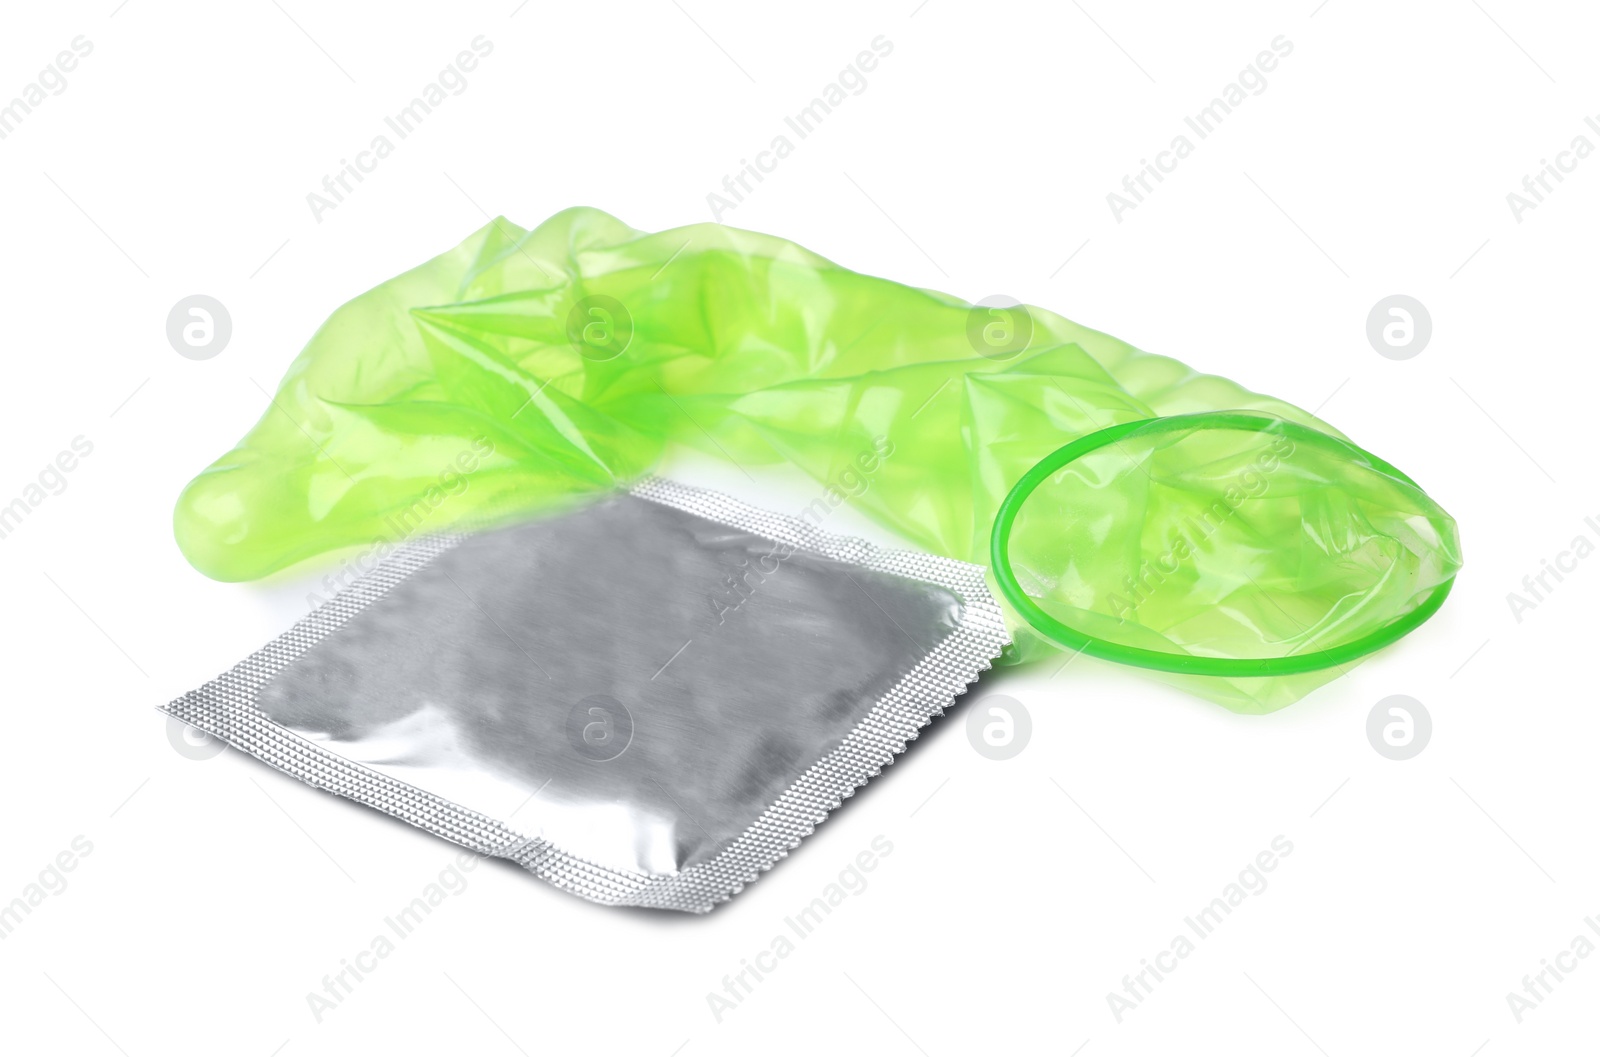 Image of Unrolled green condom and package on white background. Safe sex